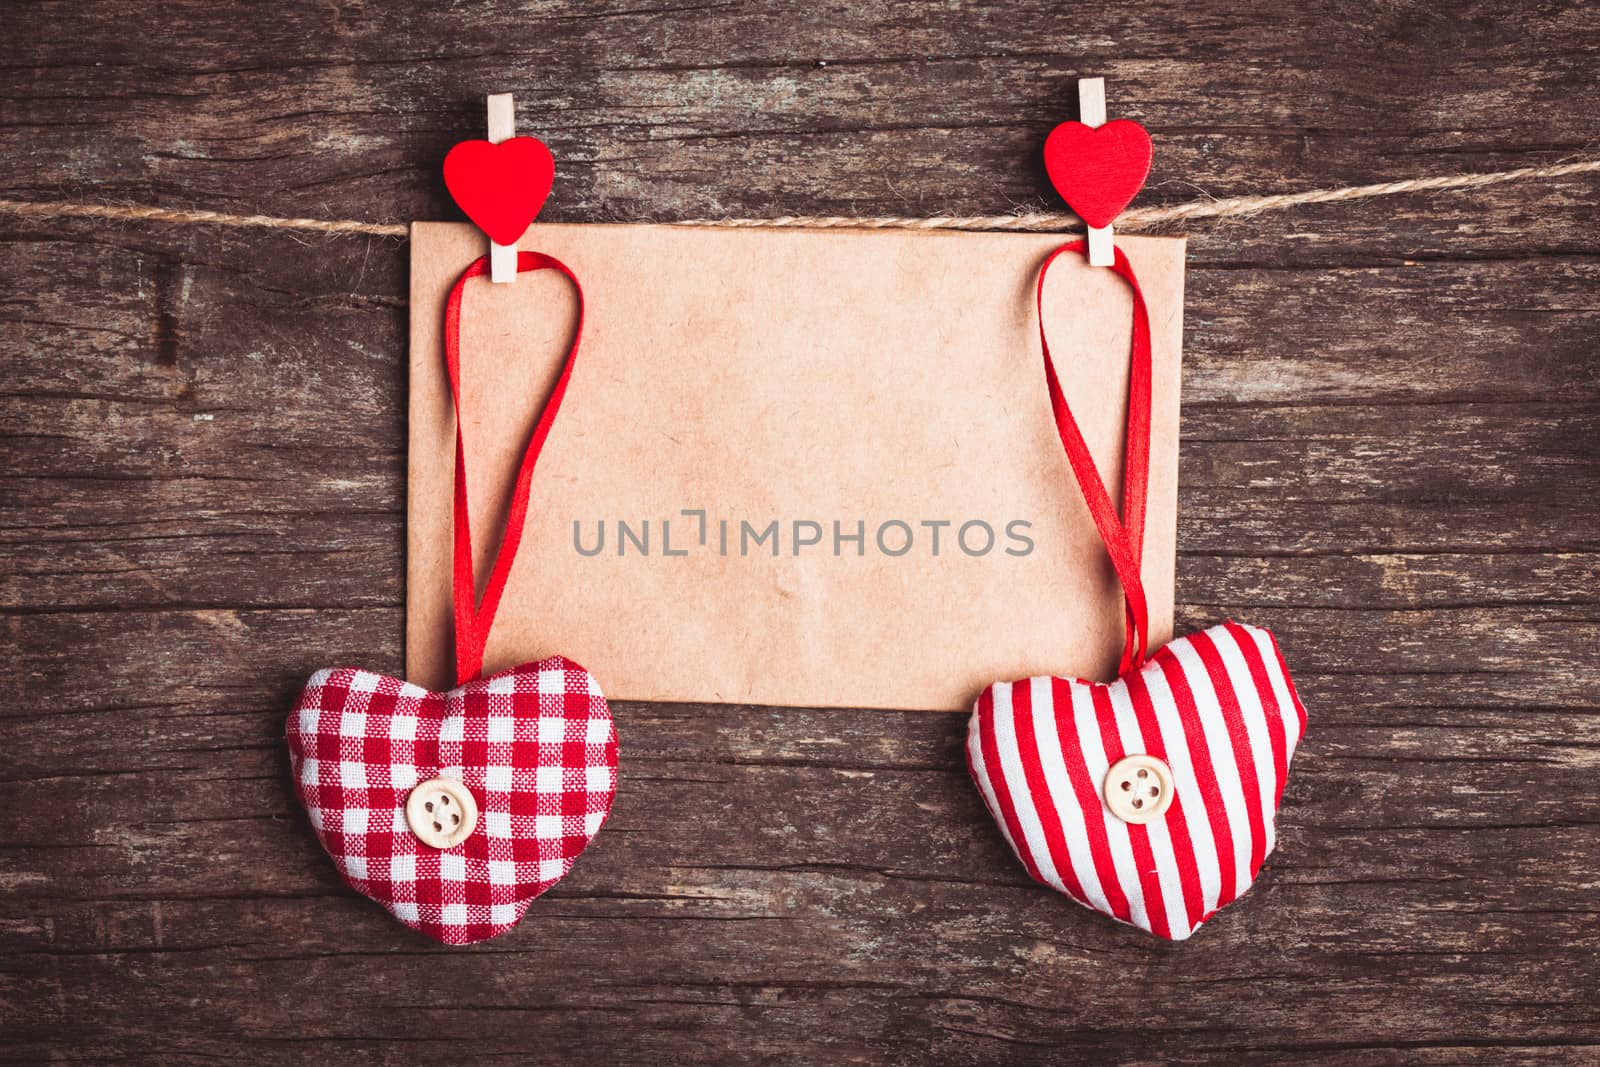 Two hearts and craft envelope .attached to the rope. Valentine greetings